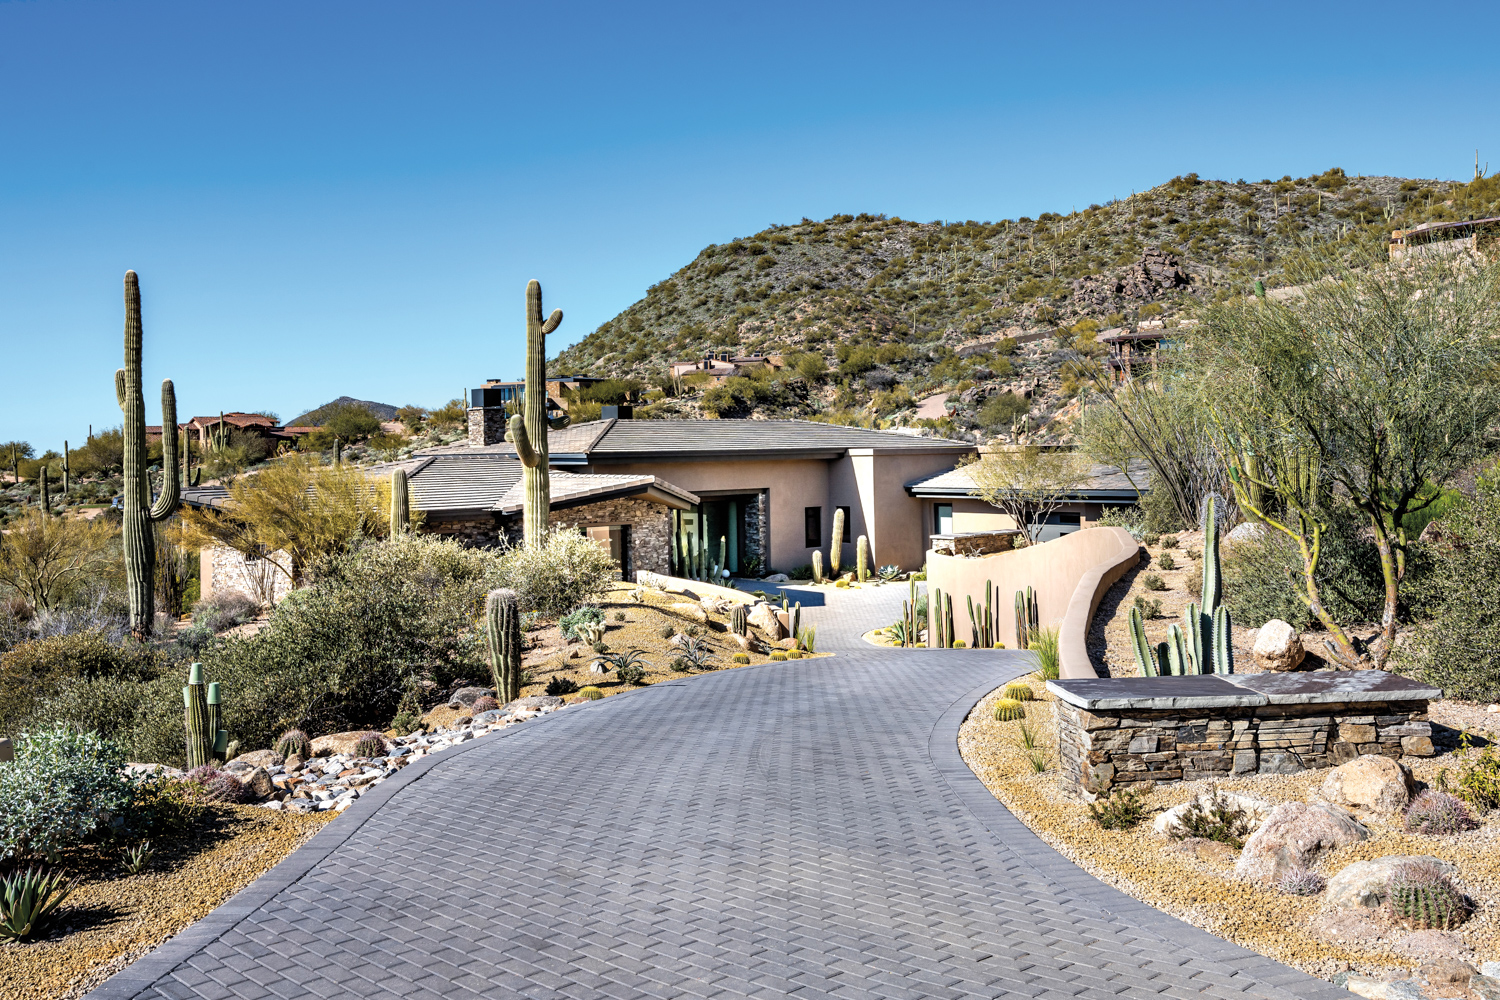 Driveway lined with cacti winds...